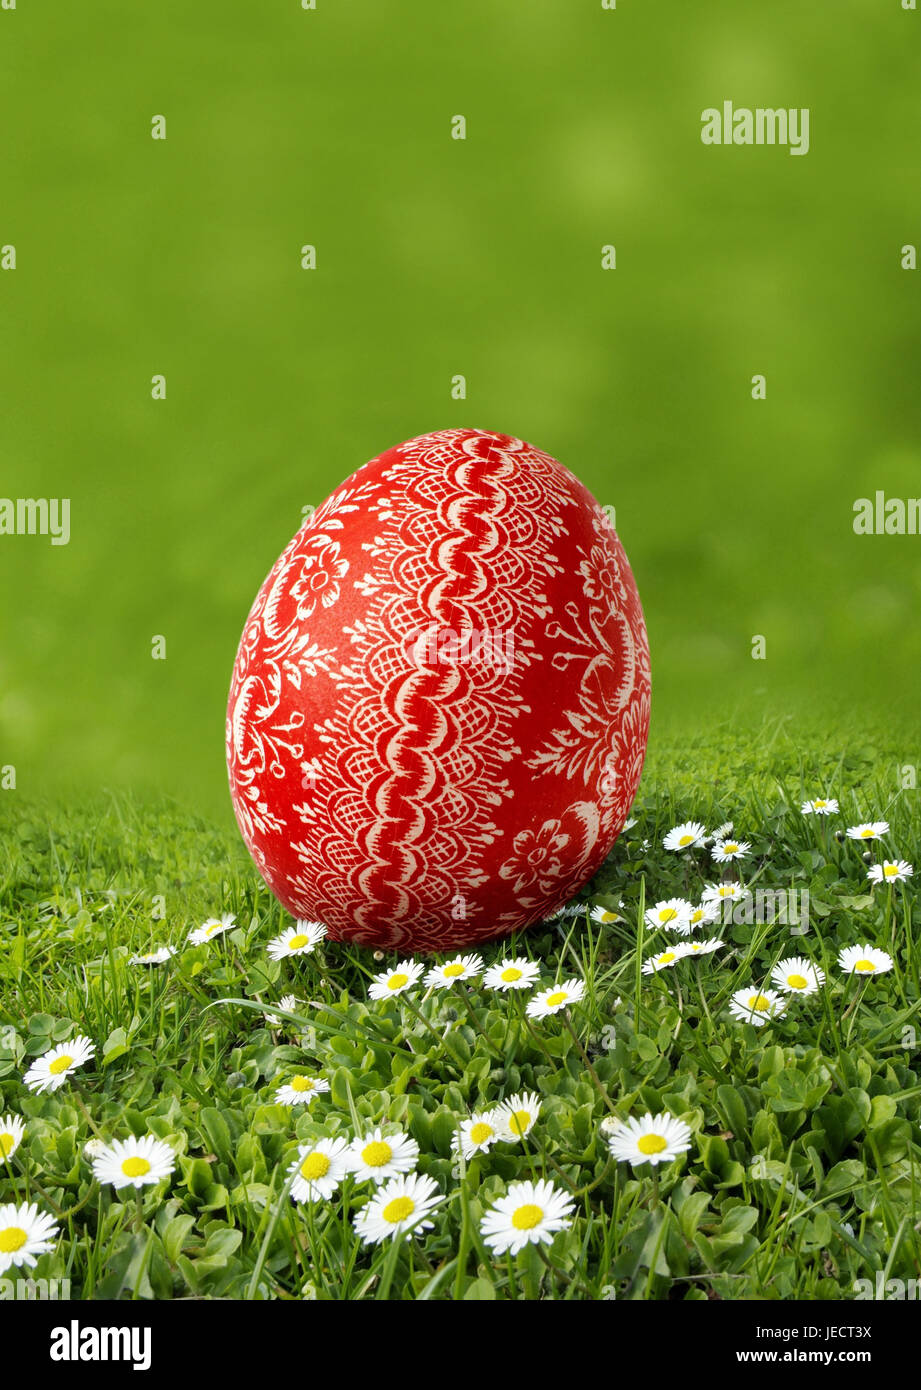 Easter, meadow, daisy, Easter egg, red, paints, ornaments, egg search, [M], grass, flower meadow, spring meadow, flowers, little flowers, culture, feast, Easter feast, Easter time, Easter traditions, tradition, österlich, egg, Hühnerei, one, individually, tintedly, sample, flowers, little flowers, painting, skilfully, filigree, Easter motif, season, icon, spring, Easter Sunday, childhood, Easter egg hunt, Easter hiding place, Stock Photo